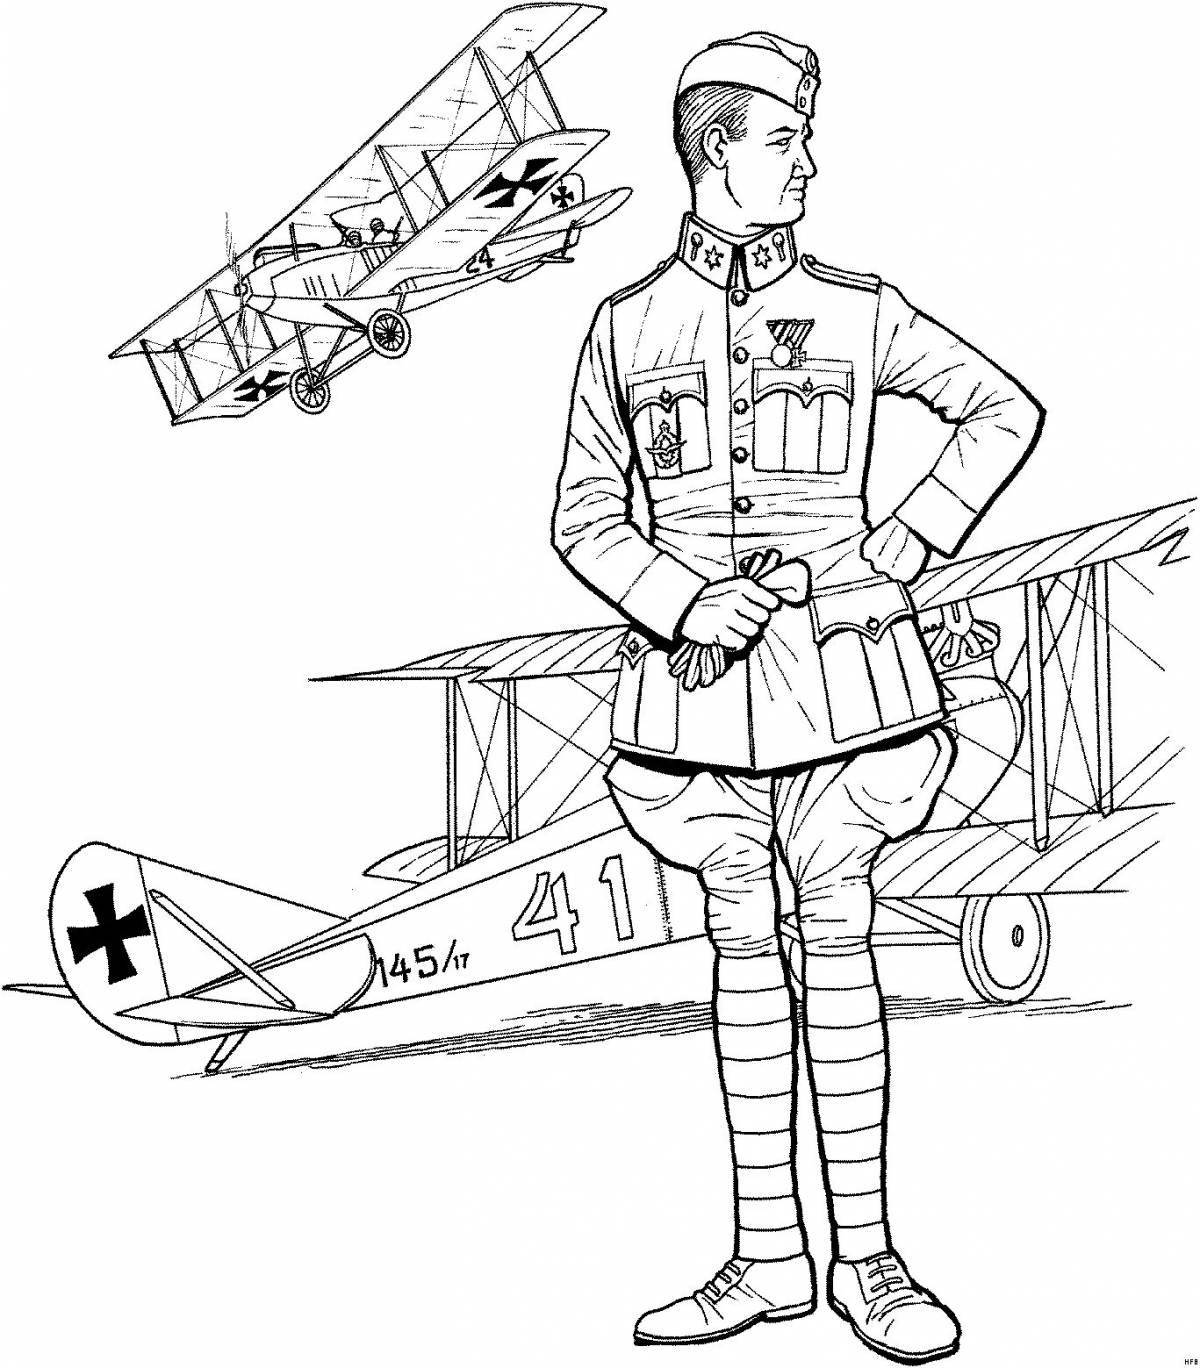 Dashing coloring pages soldiers of different branches of the military for children